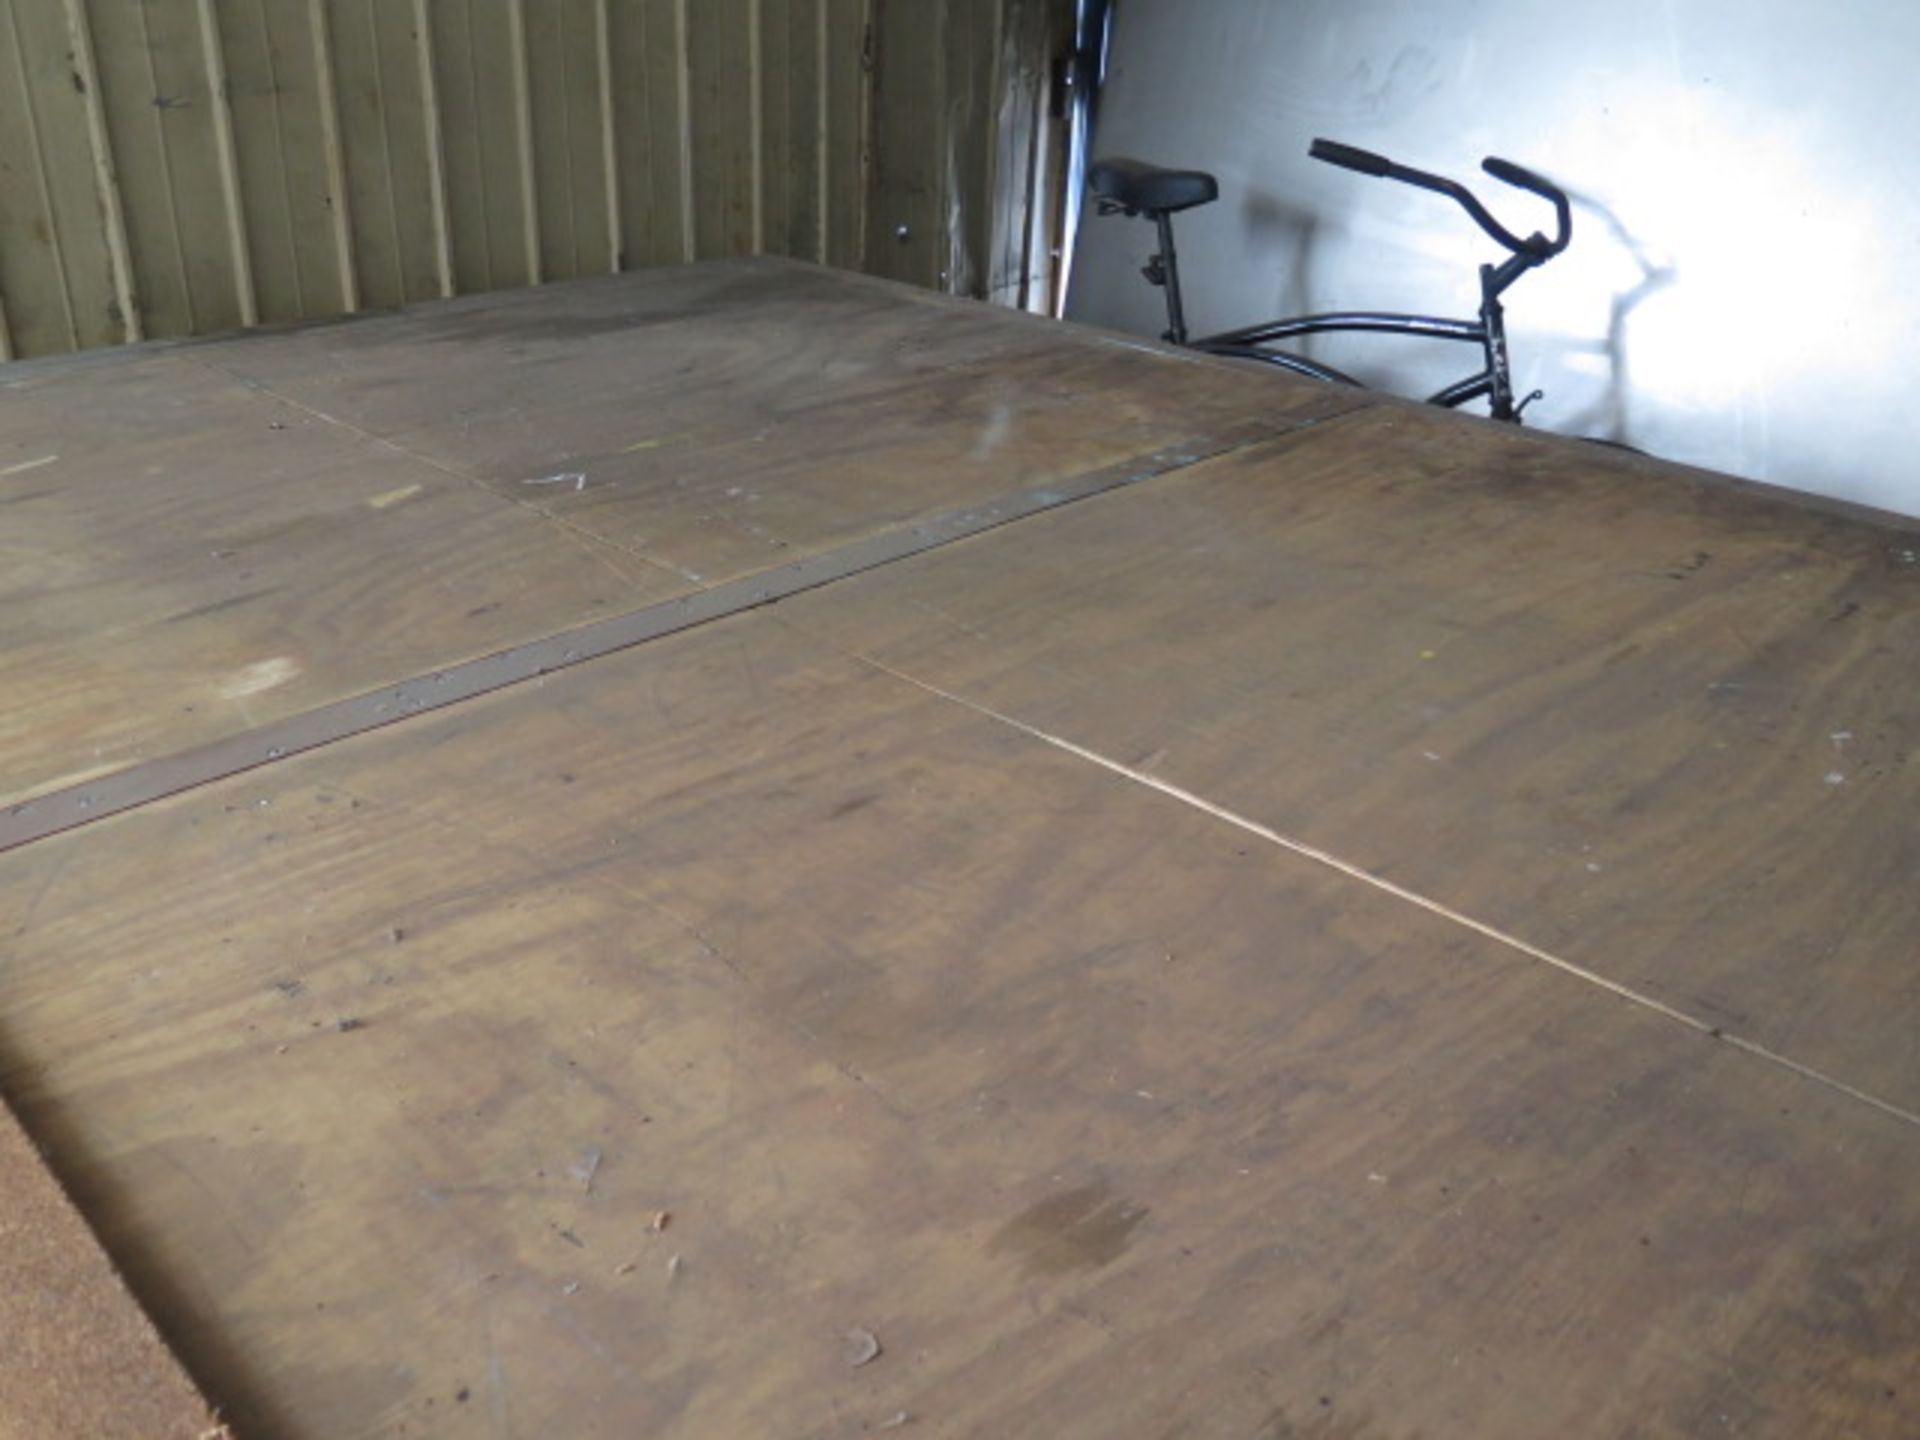 7’ x 16’ Spot Welding Table (SOLD AS-IS - NO WARRANTY) - Image 4 of 4